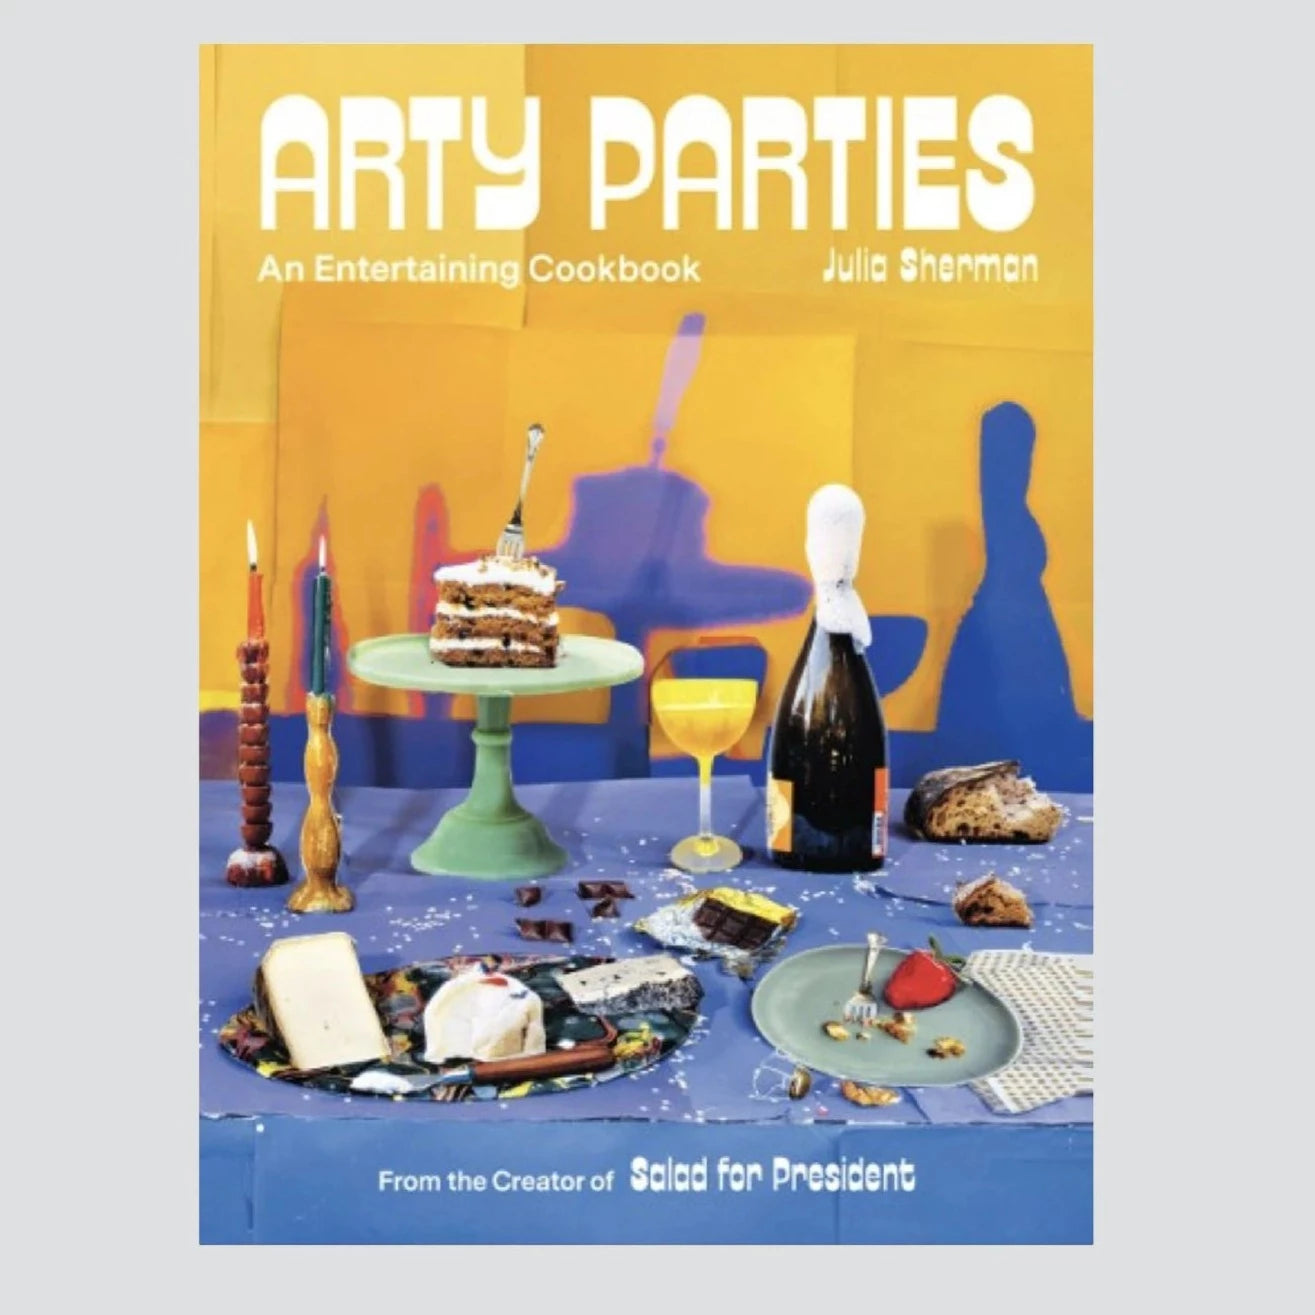 Arty Parties: An Entertaining Cookbook - The Crowd Went Wild